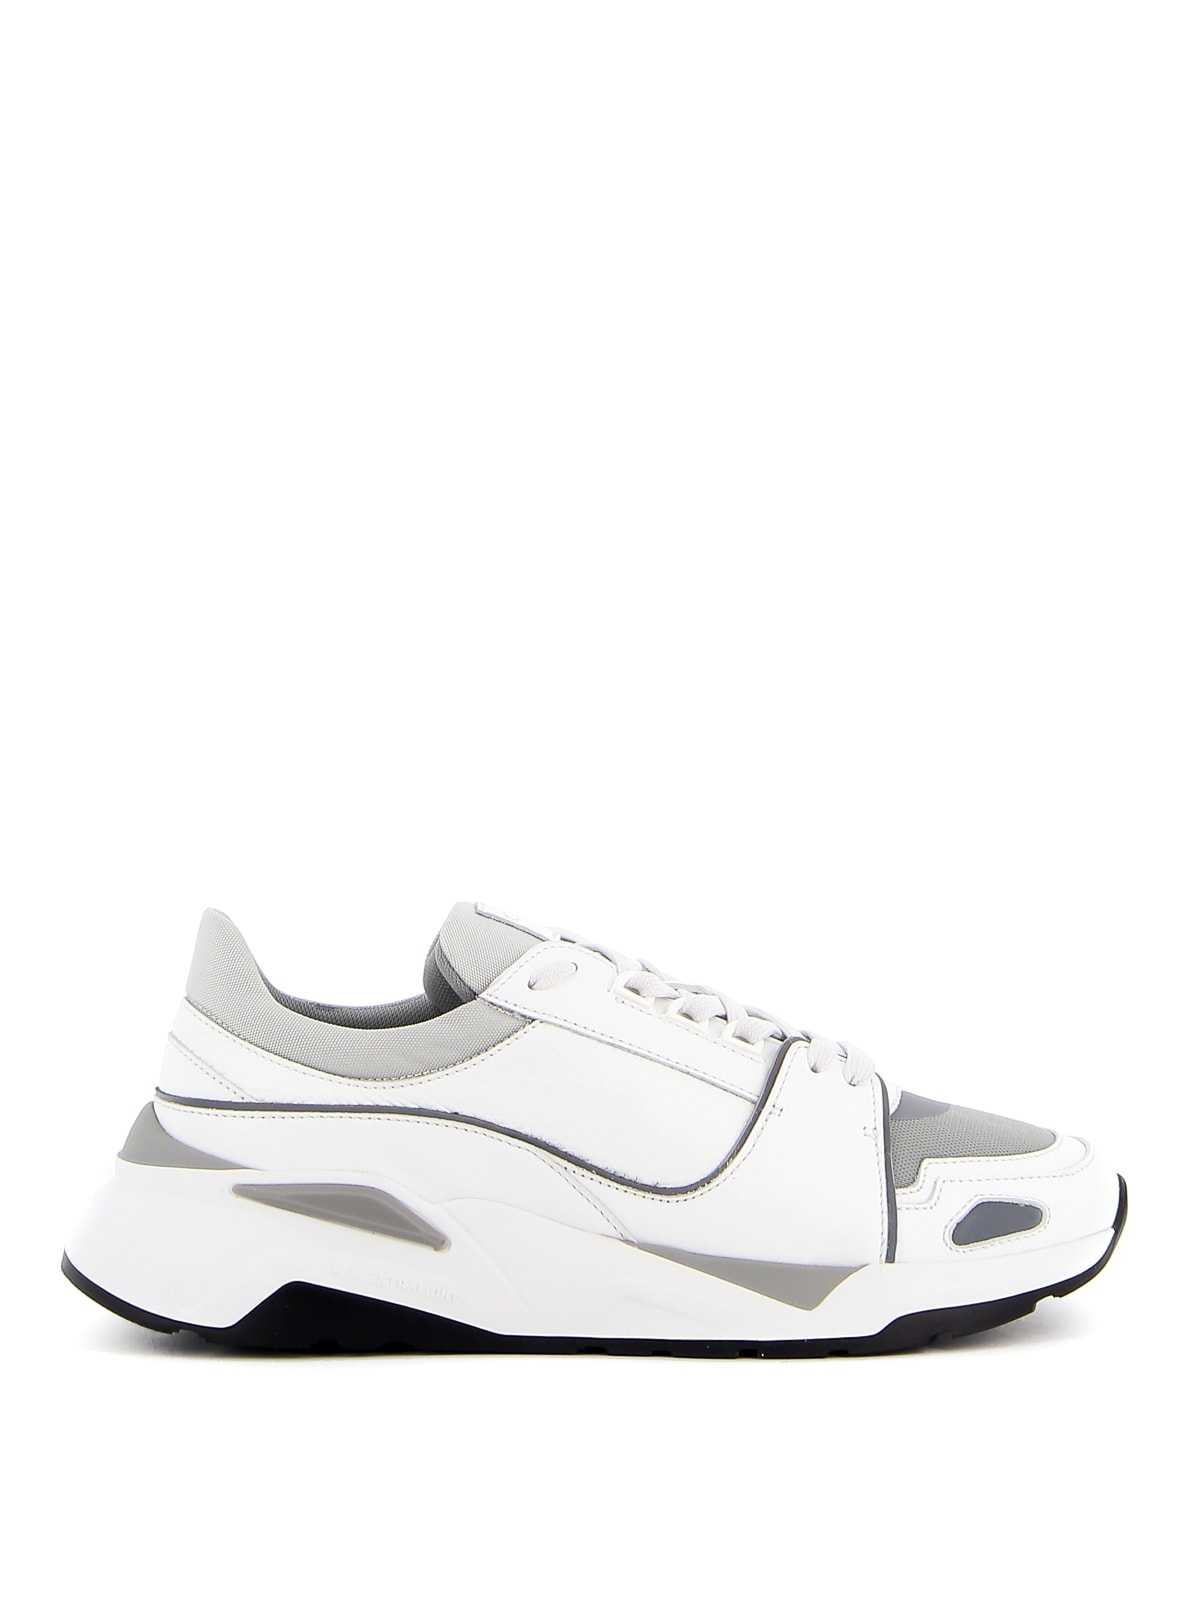 CANALI SNEAKERS,RY00530.191215 001 WHITE